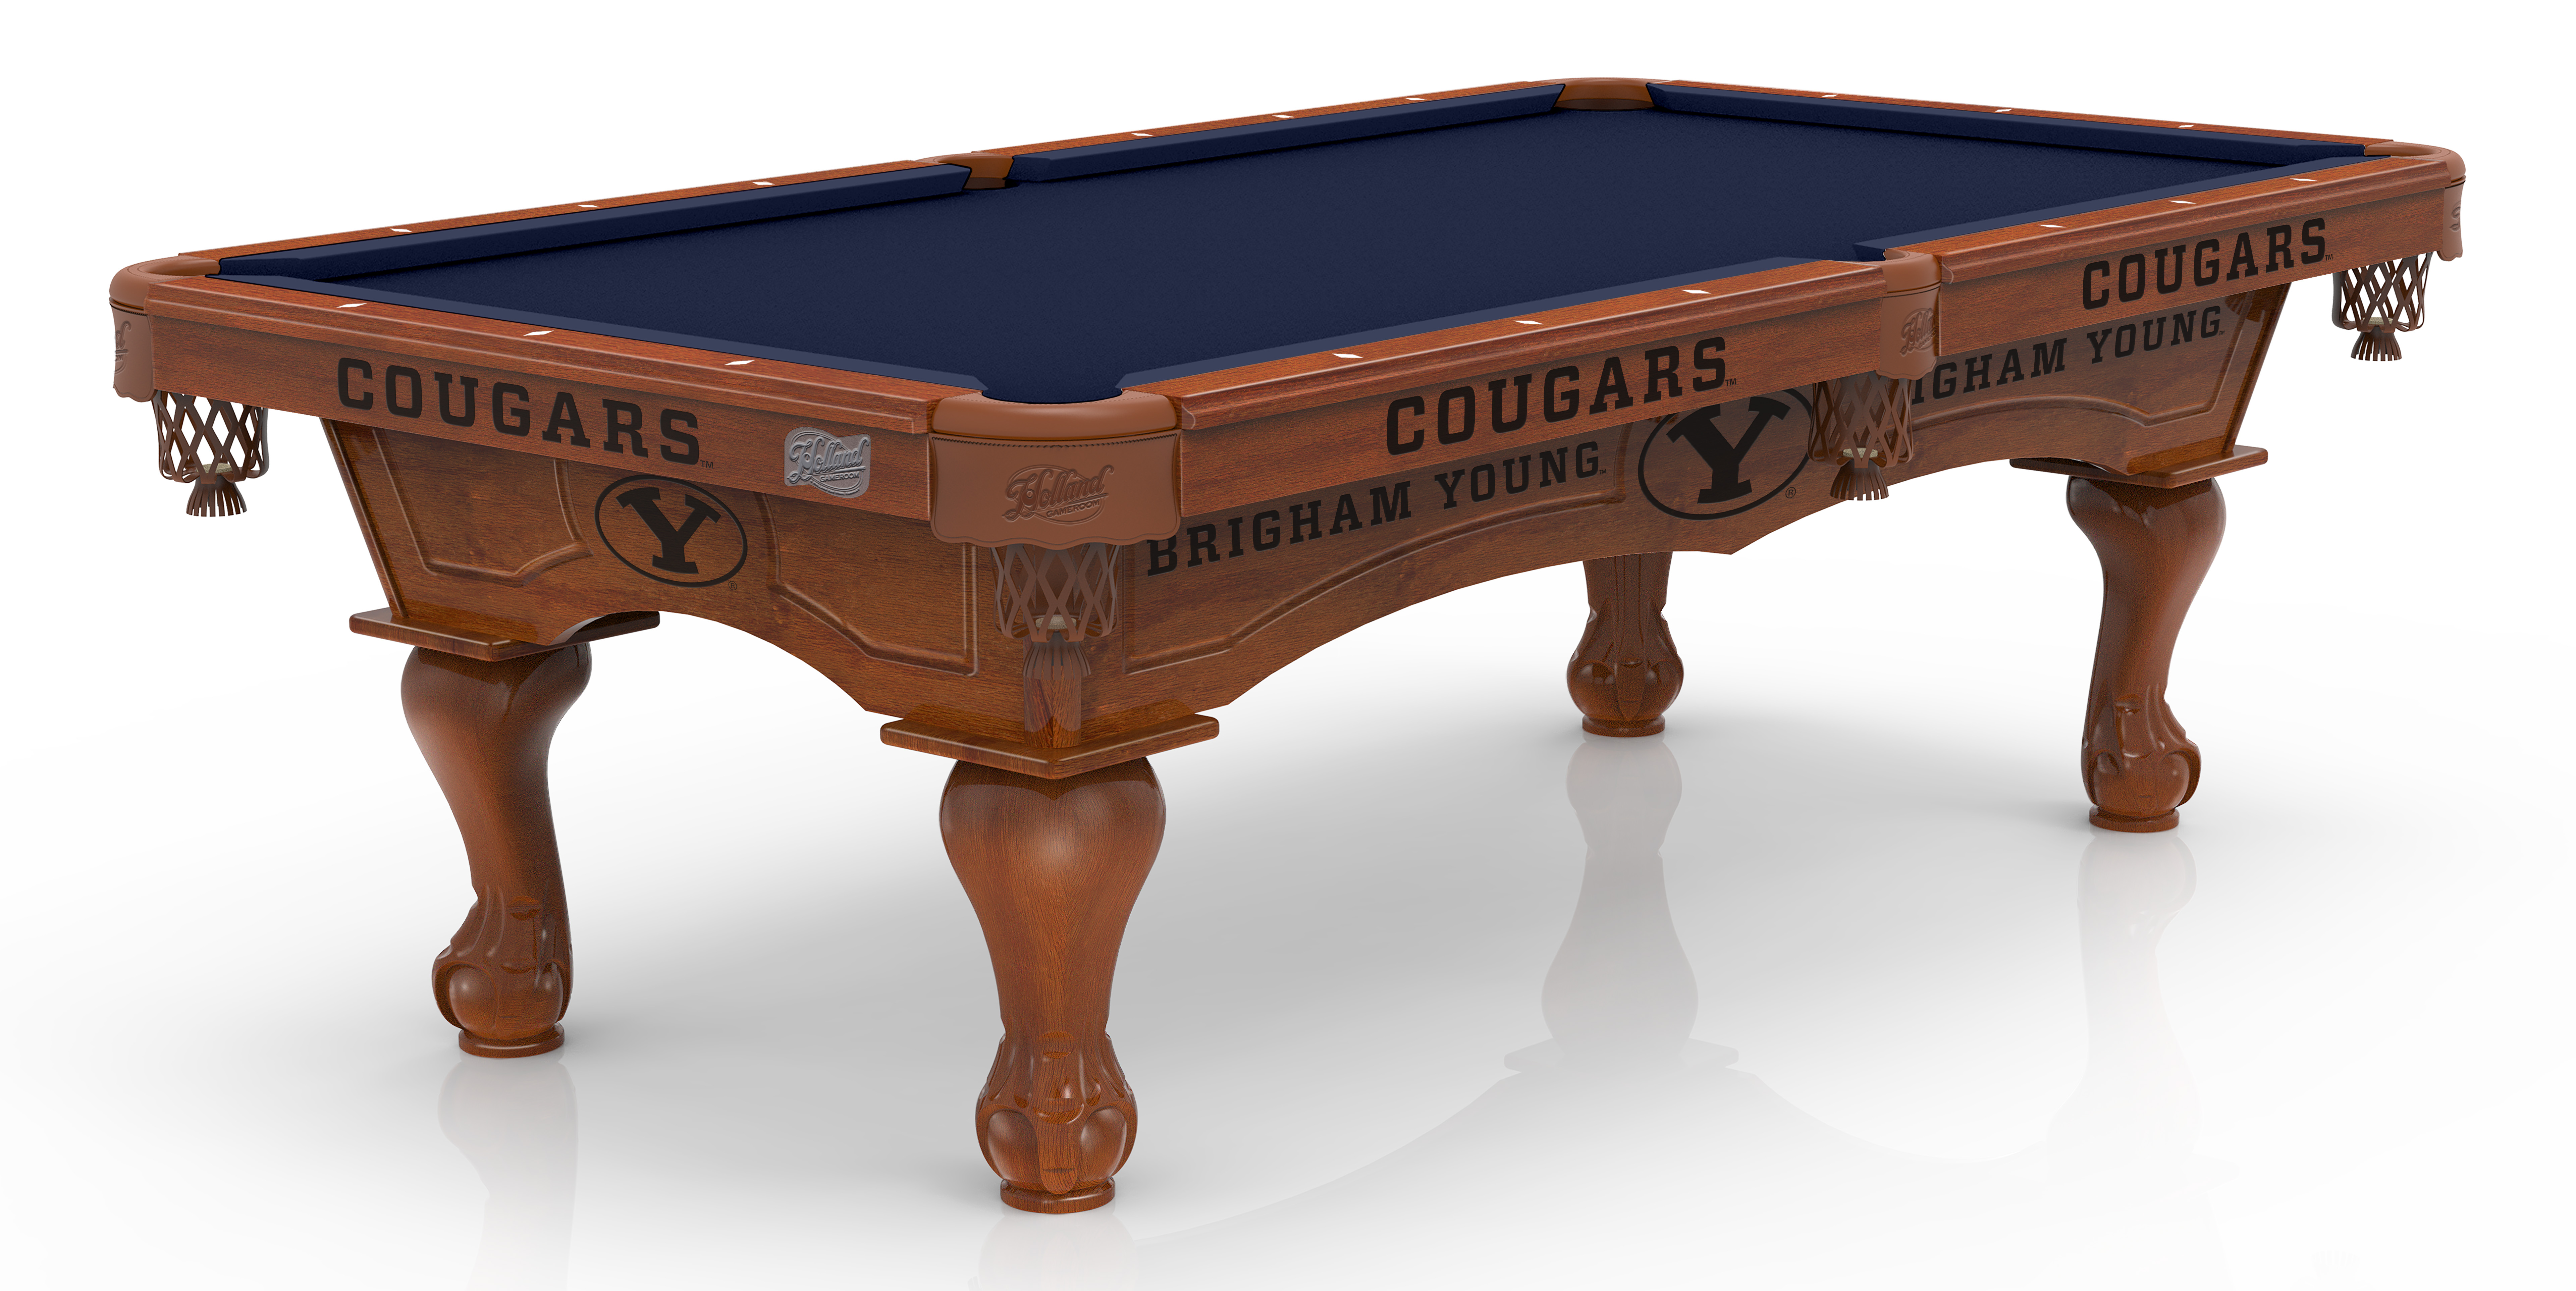 8 Ft. Brigham Young Pool Table